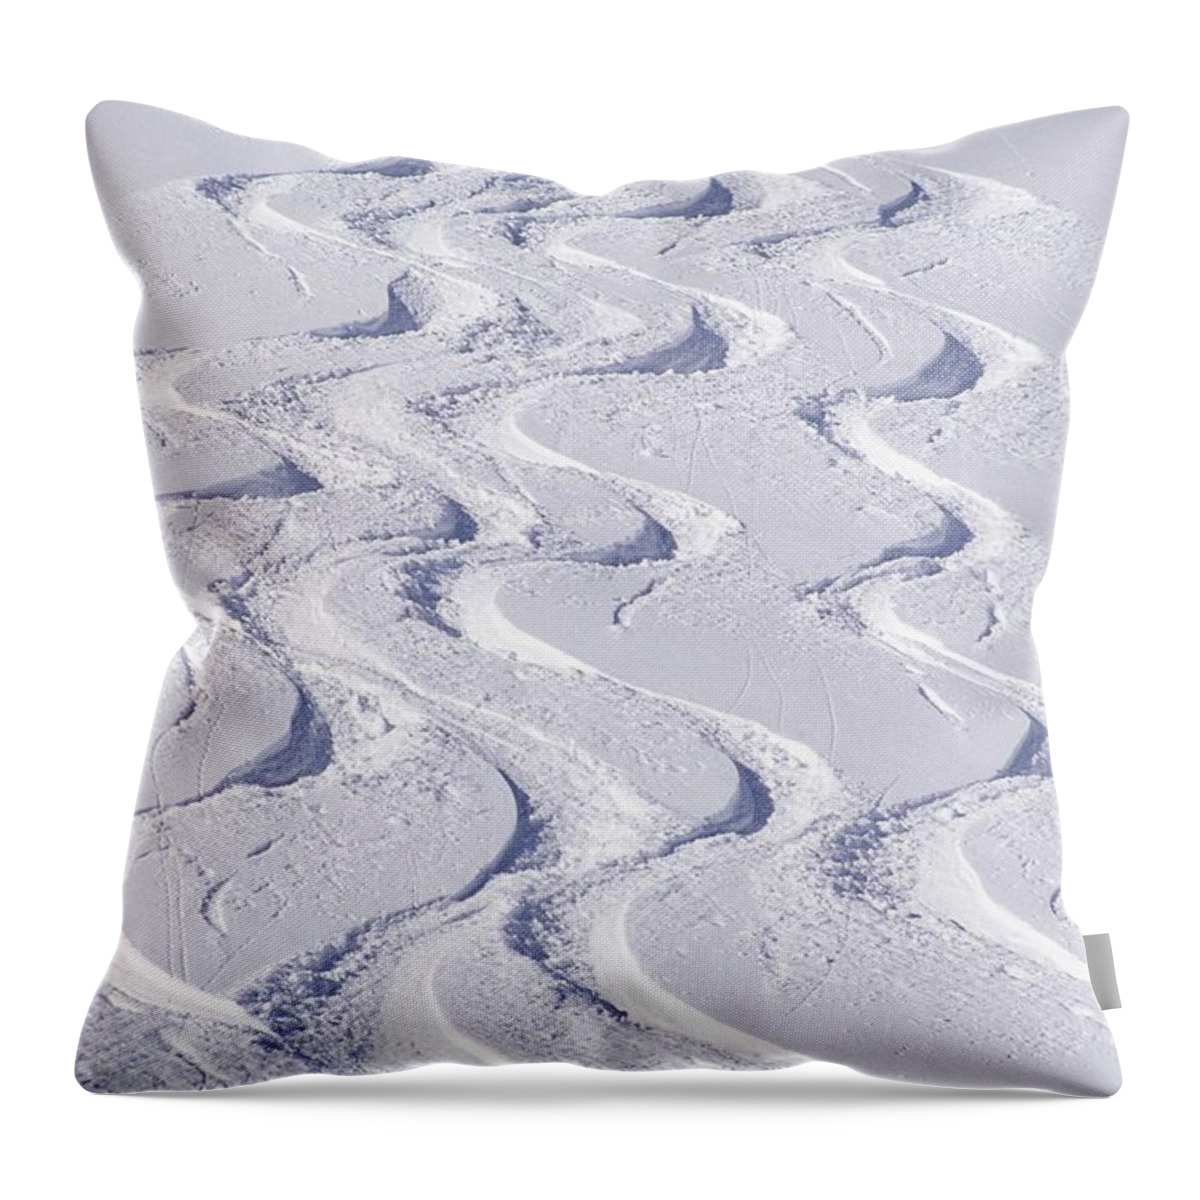 Skiing Throw Pillow featuring the photograph Rails In Snow by Marten Adolfson